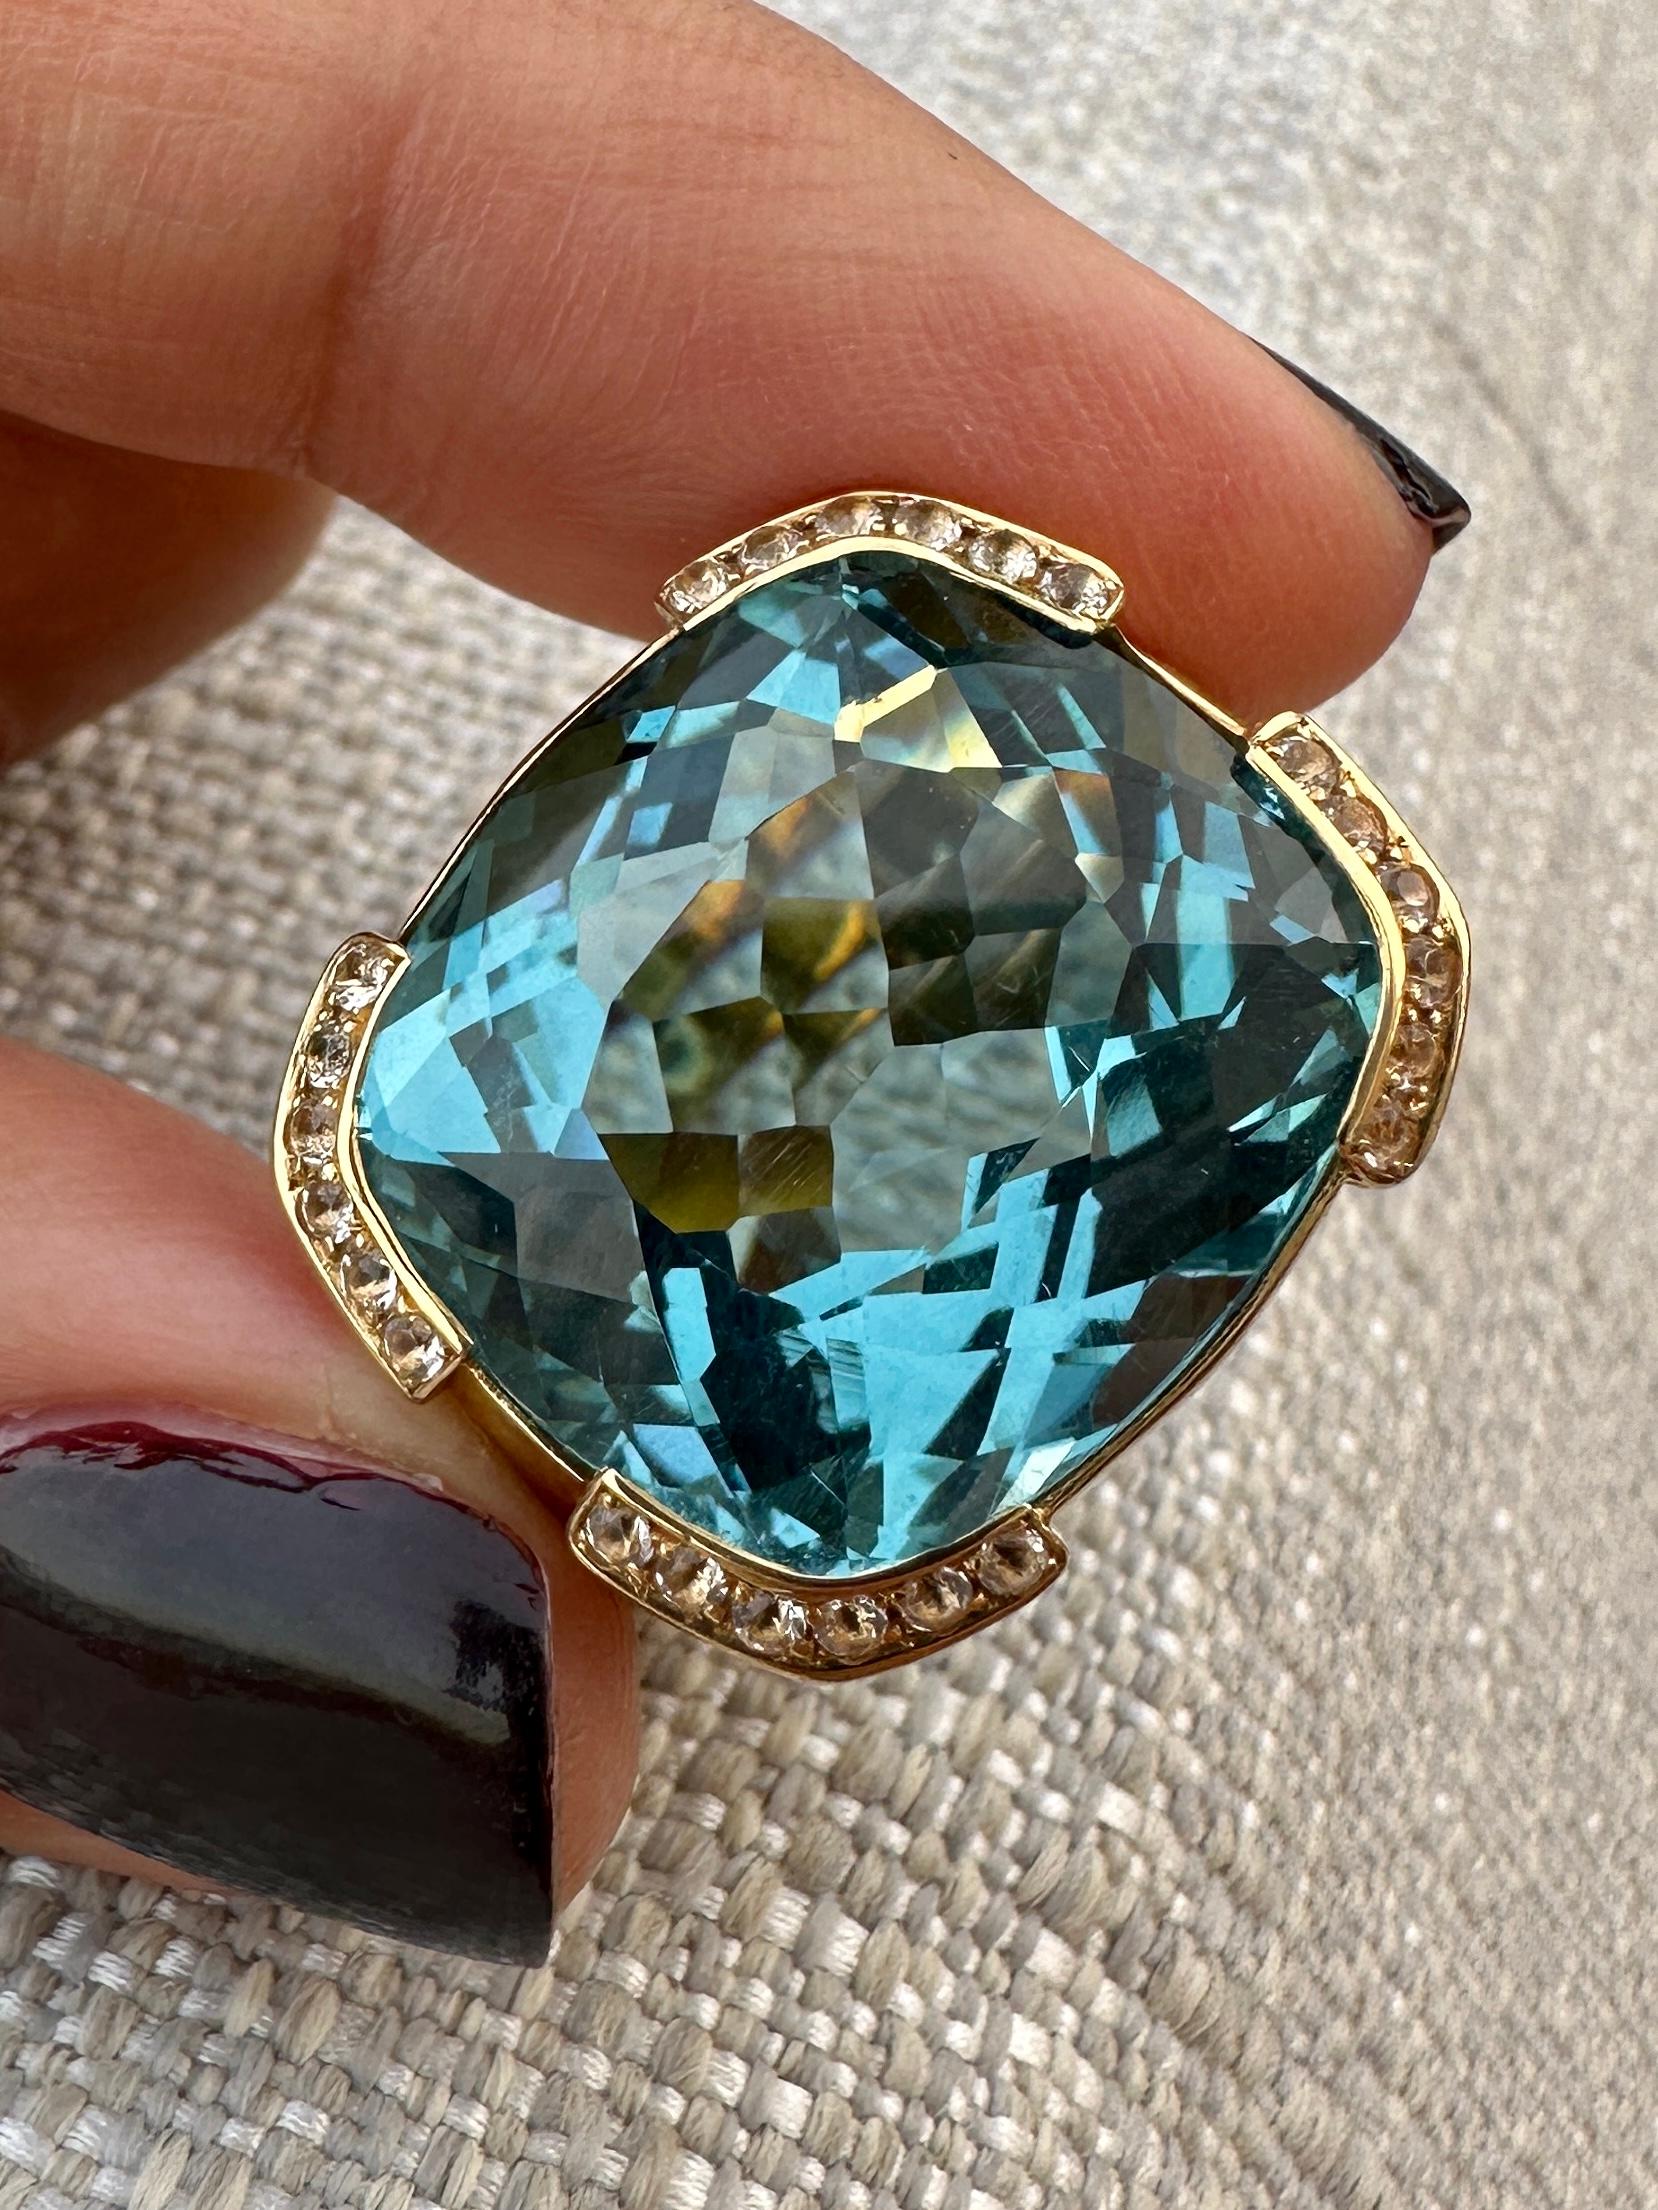 Circa 1970, 19.2K Gold Portuguese Ring. These gorgeous seventies Ring is Set with a Massive Deep Blue 40 Carats Aquamarine framed by 24 white Diamonds totaling 1.92 Carats ( G - H Color, VS - SI1 Clarity).
Is Style Sophisticated look create a sleek